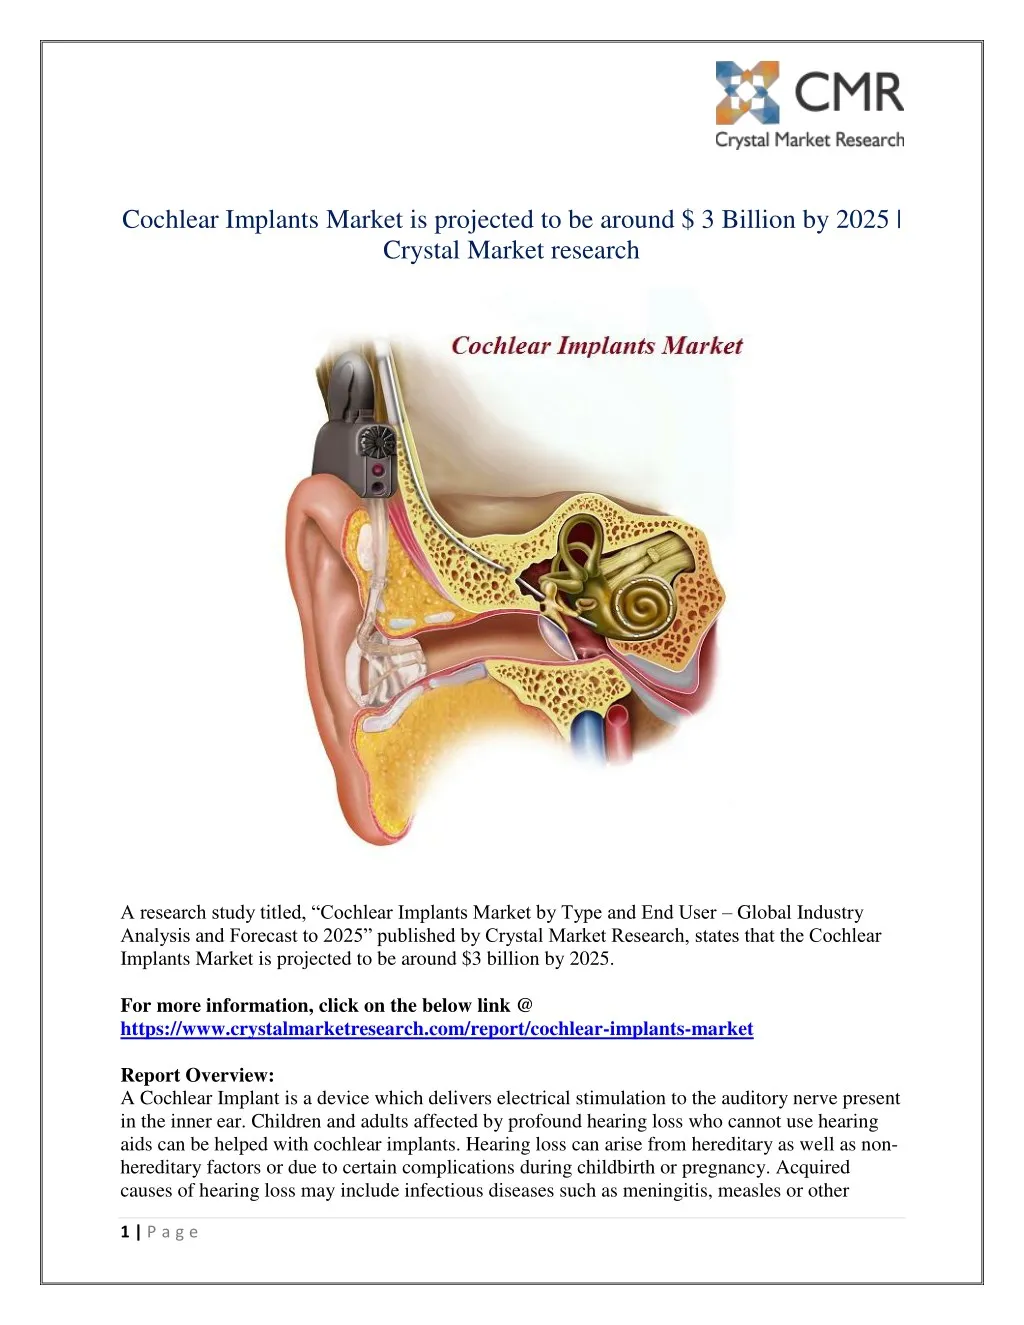 cochlear implants market is projected